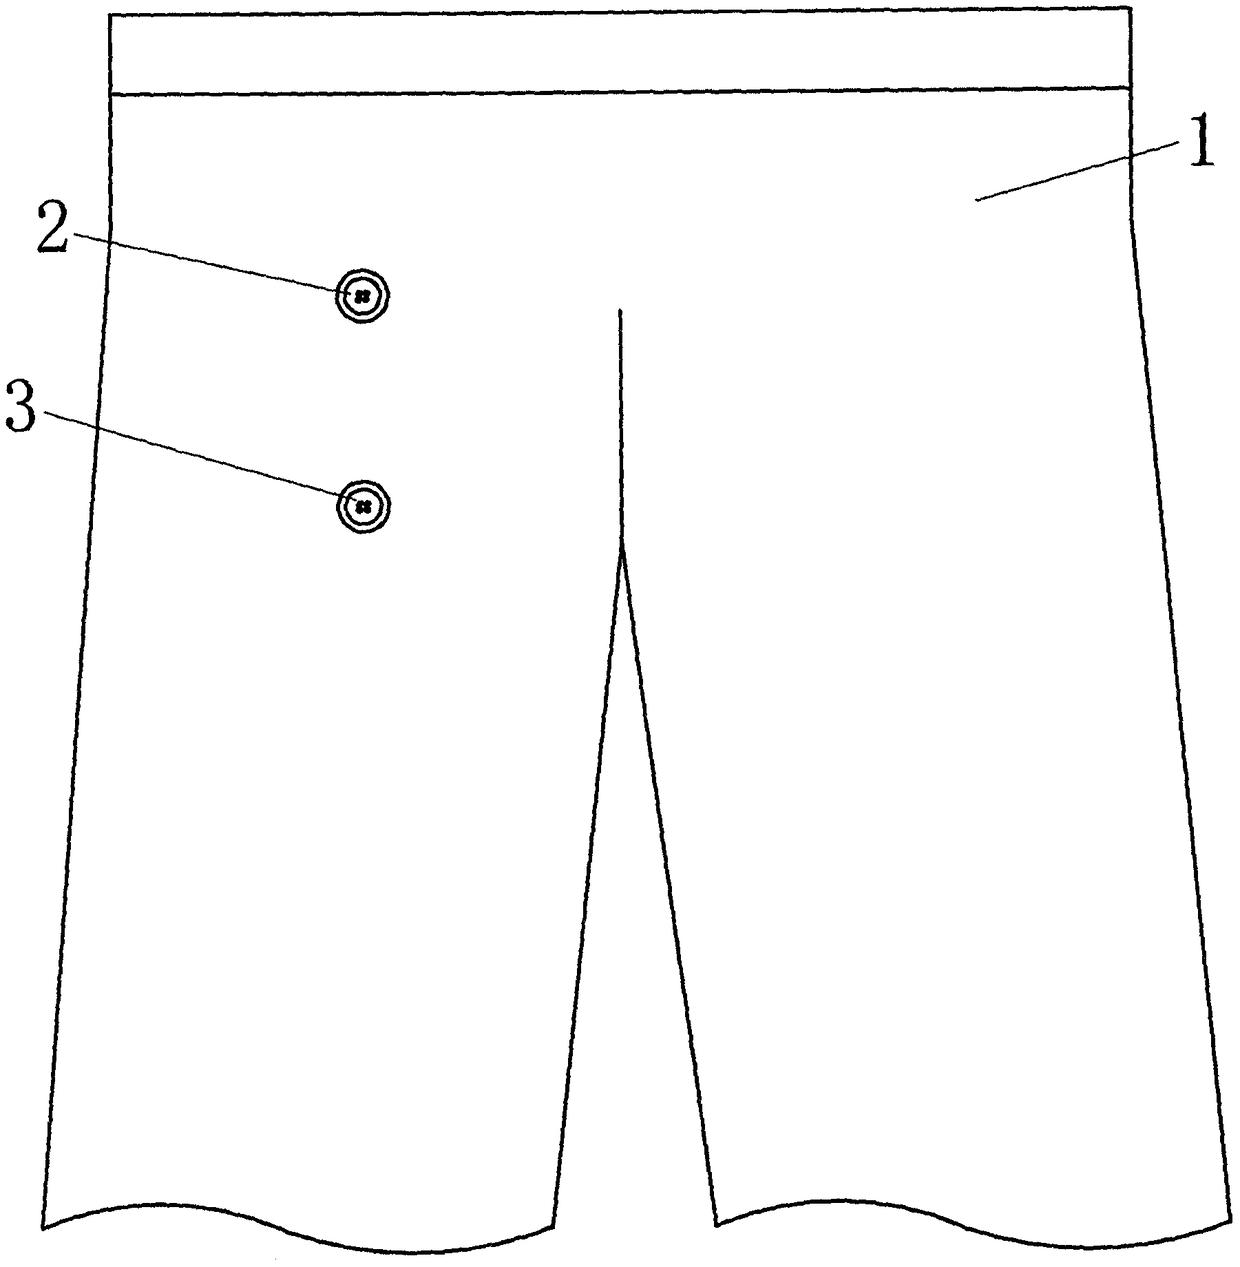 A sports/leisure trousers with a displaceable/disassemble pocket